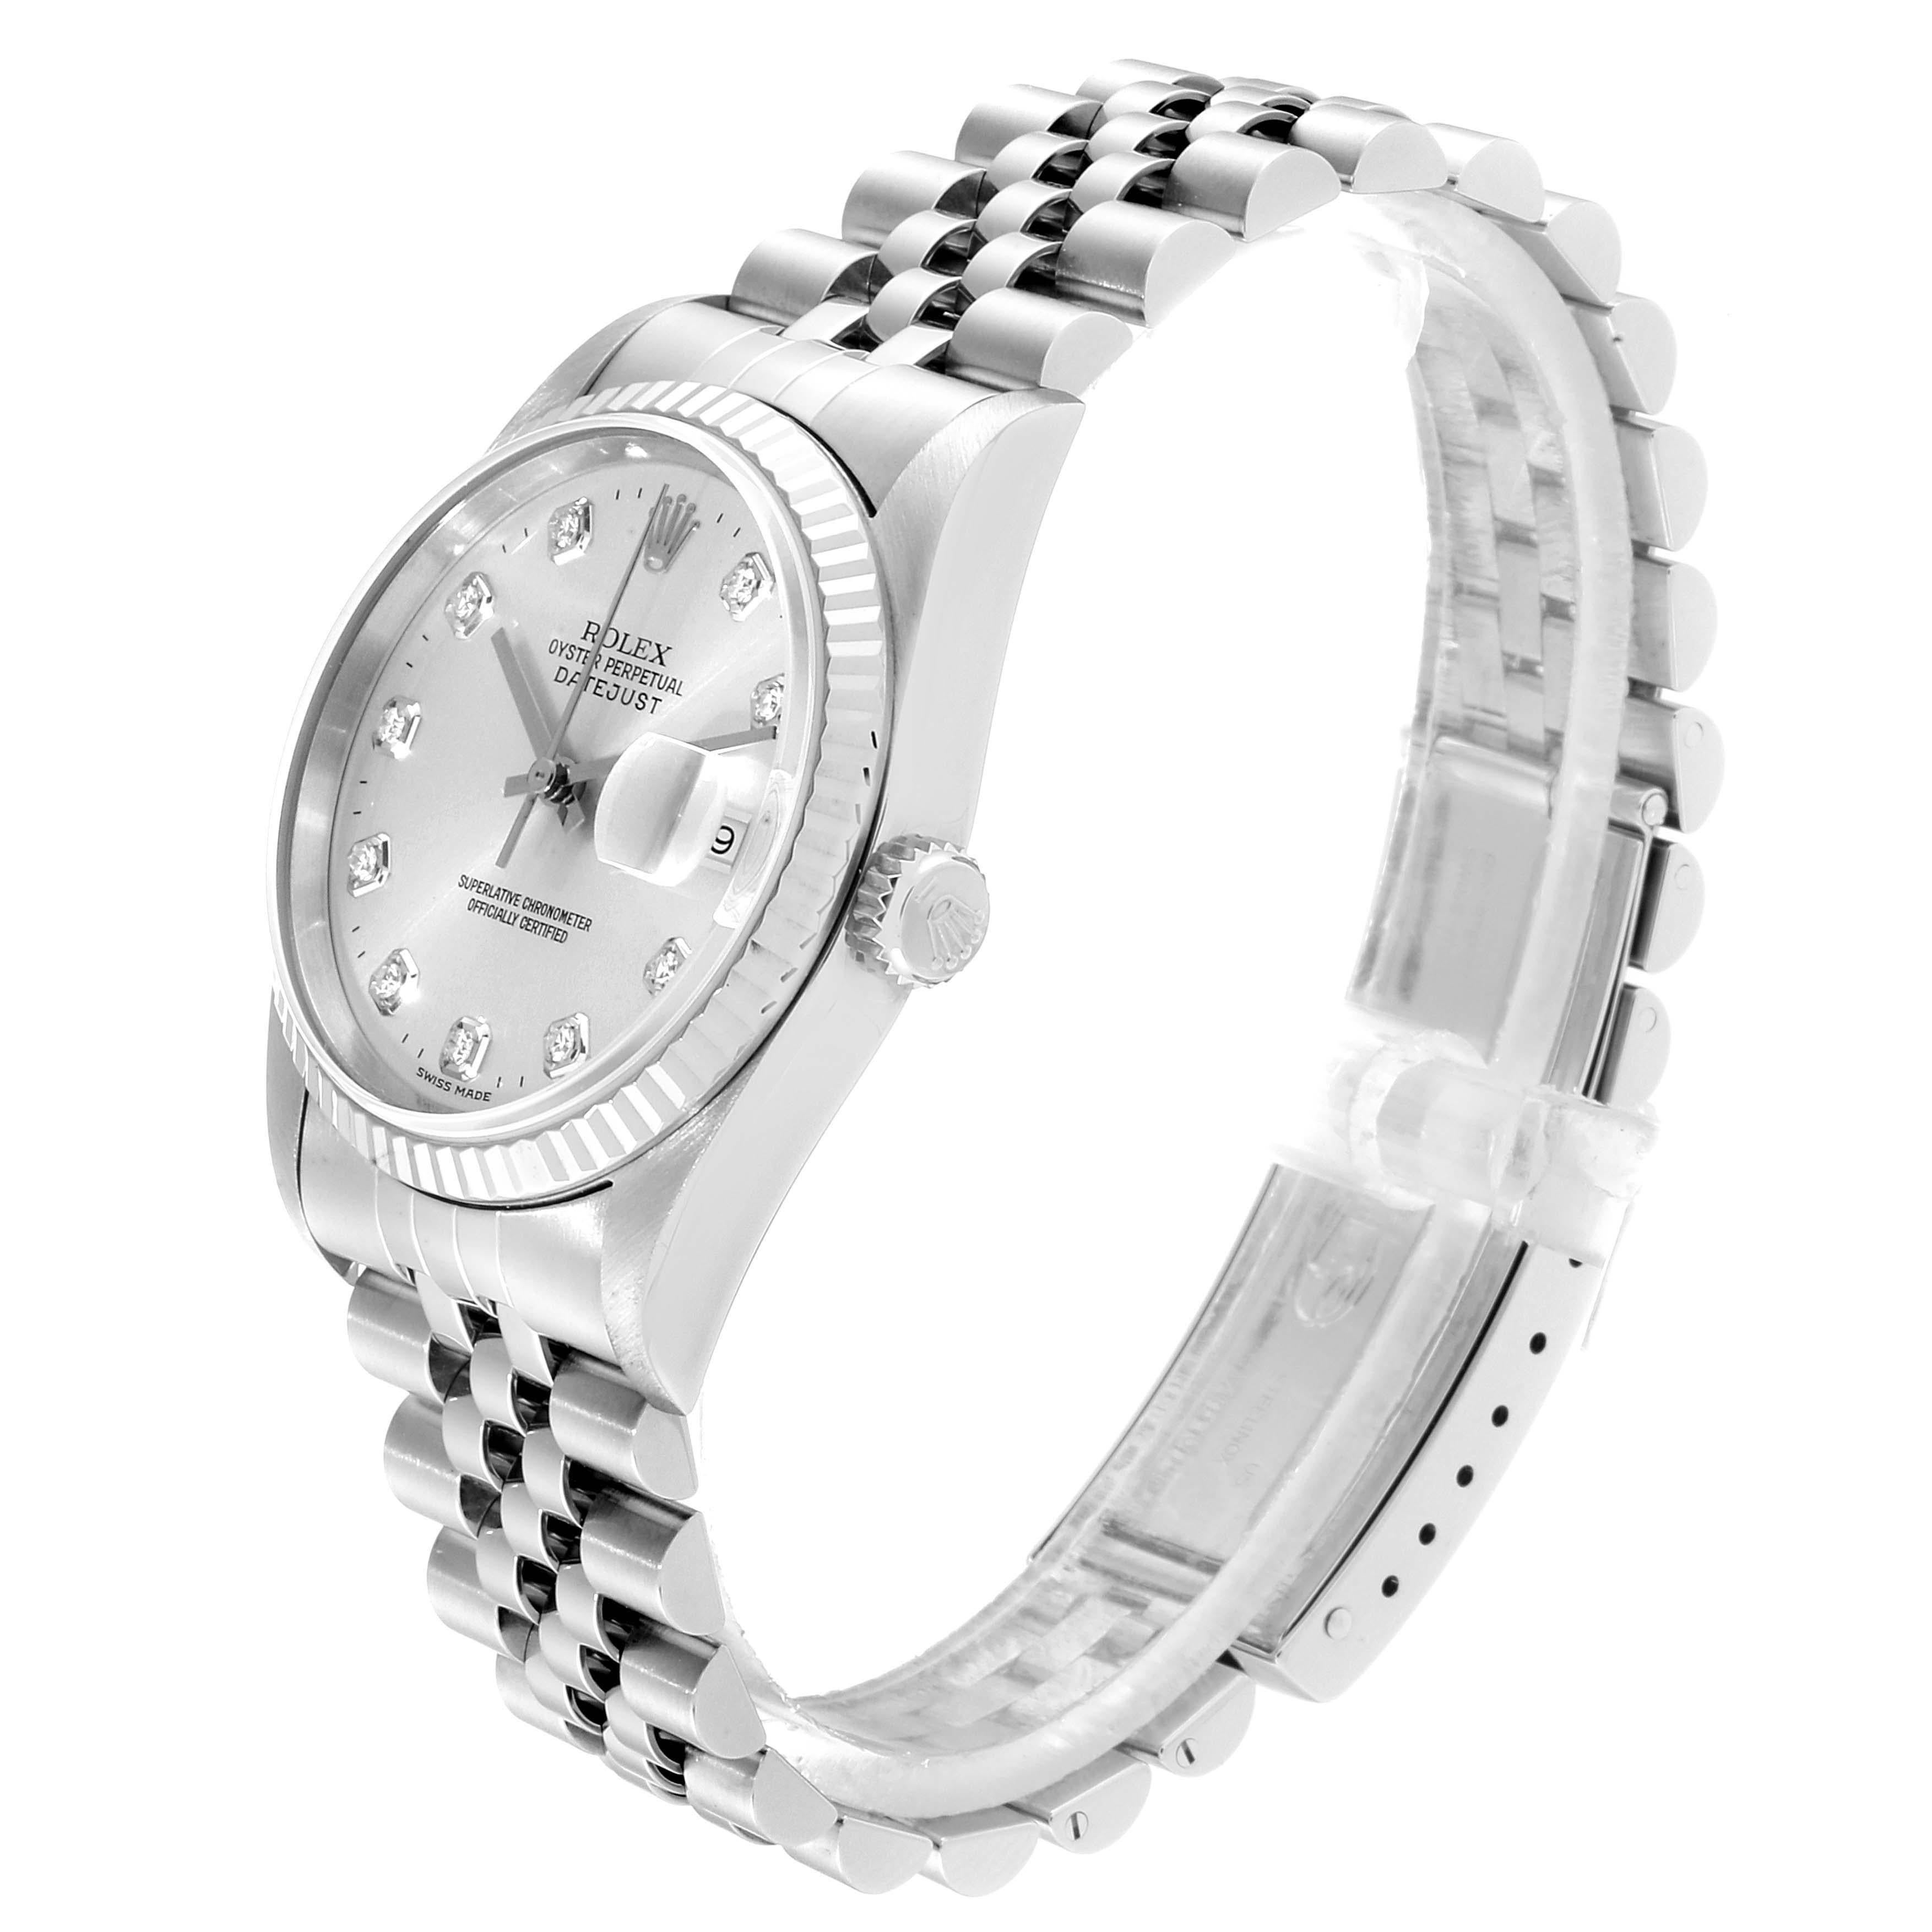 Rolex Datejust Steel White Gold Silver Diamond Dial Men's Watch 16234 For Sale 1